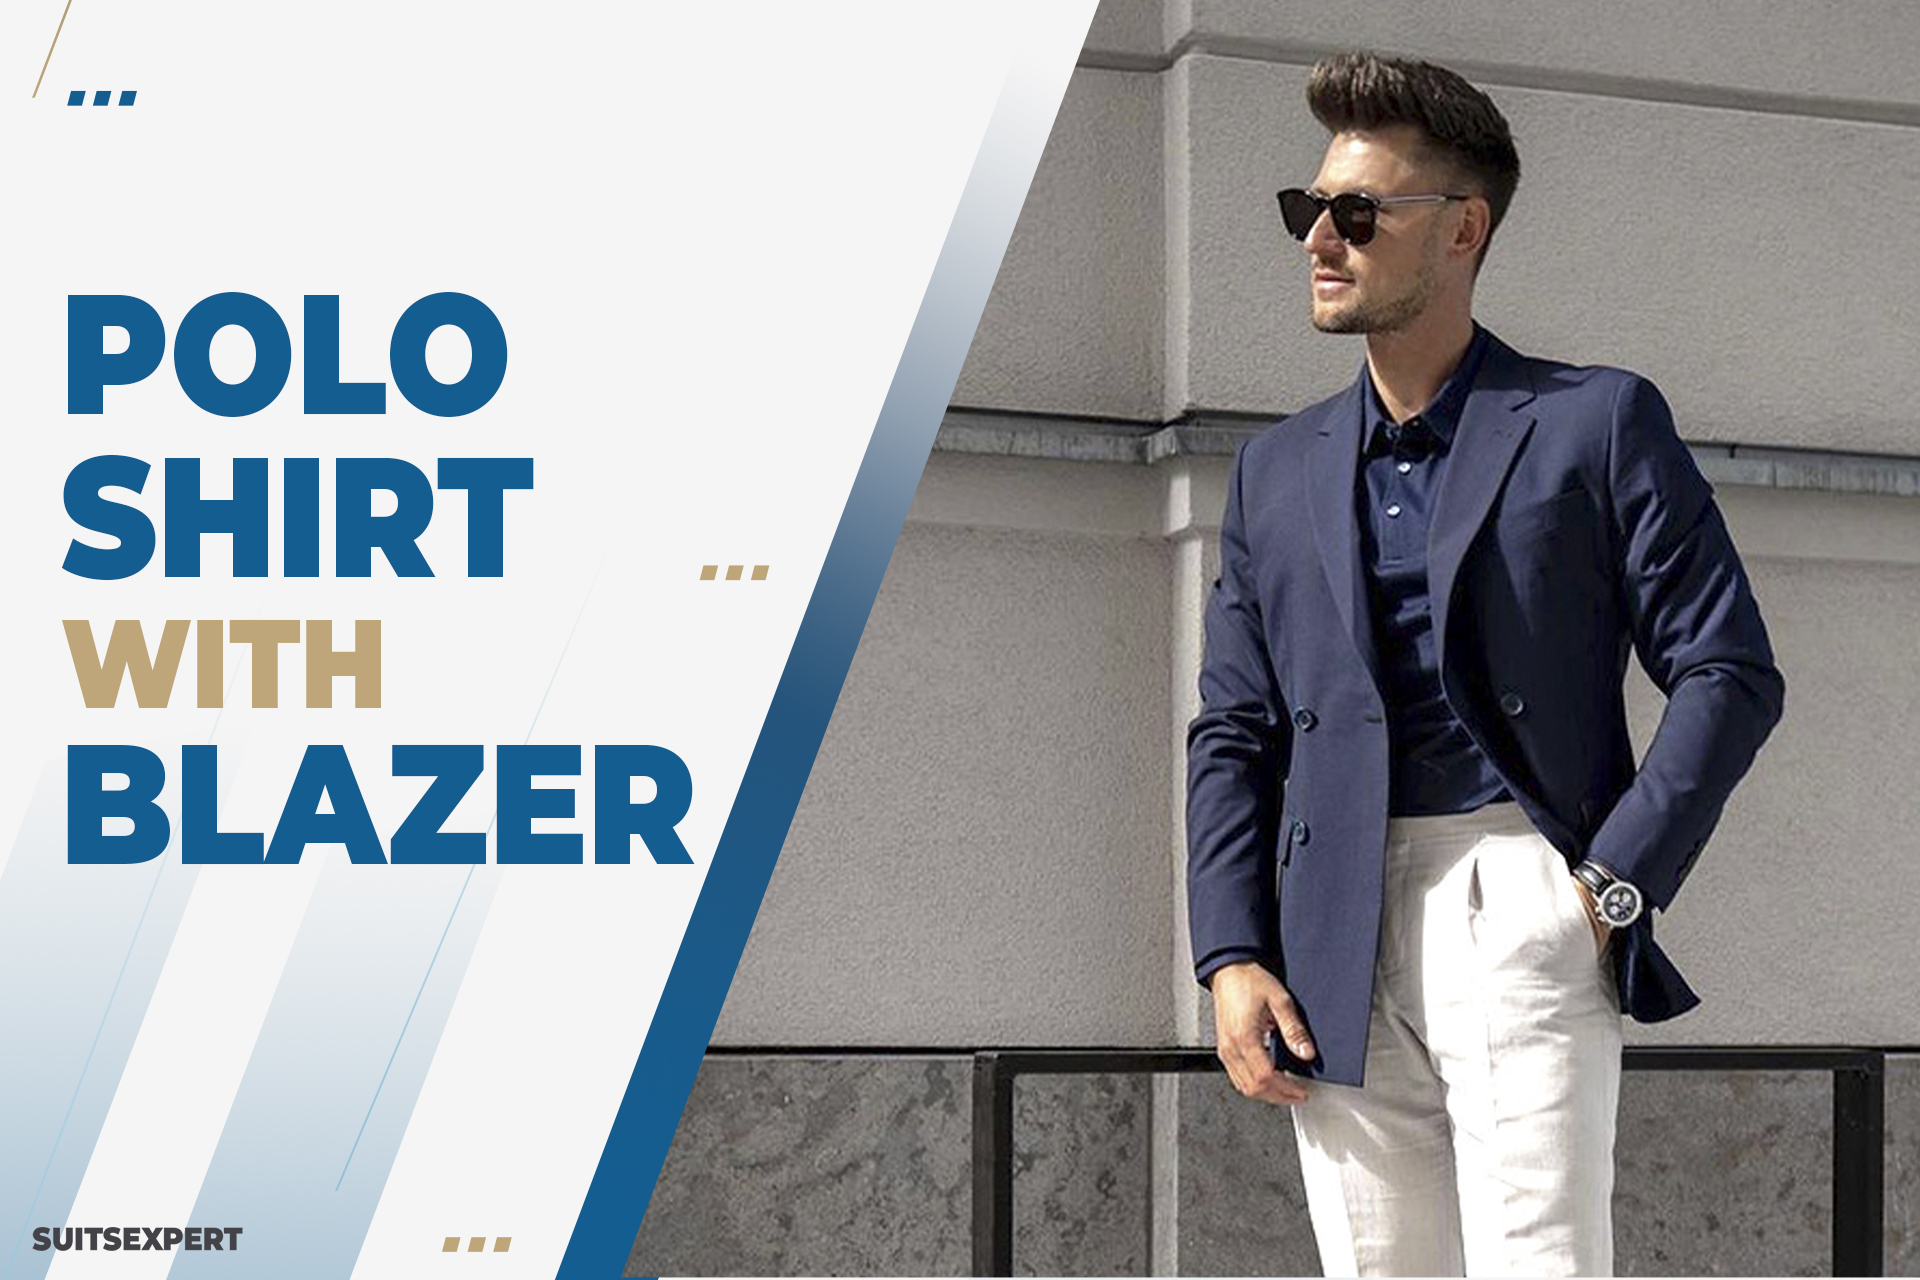 14 Stylish Polo Shirt with Blazer Outfits for Men - Suits Expert